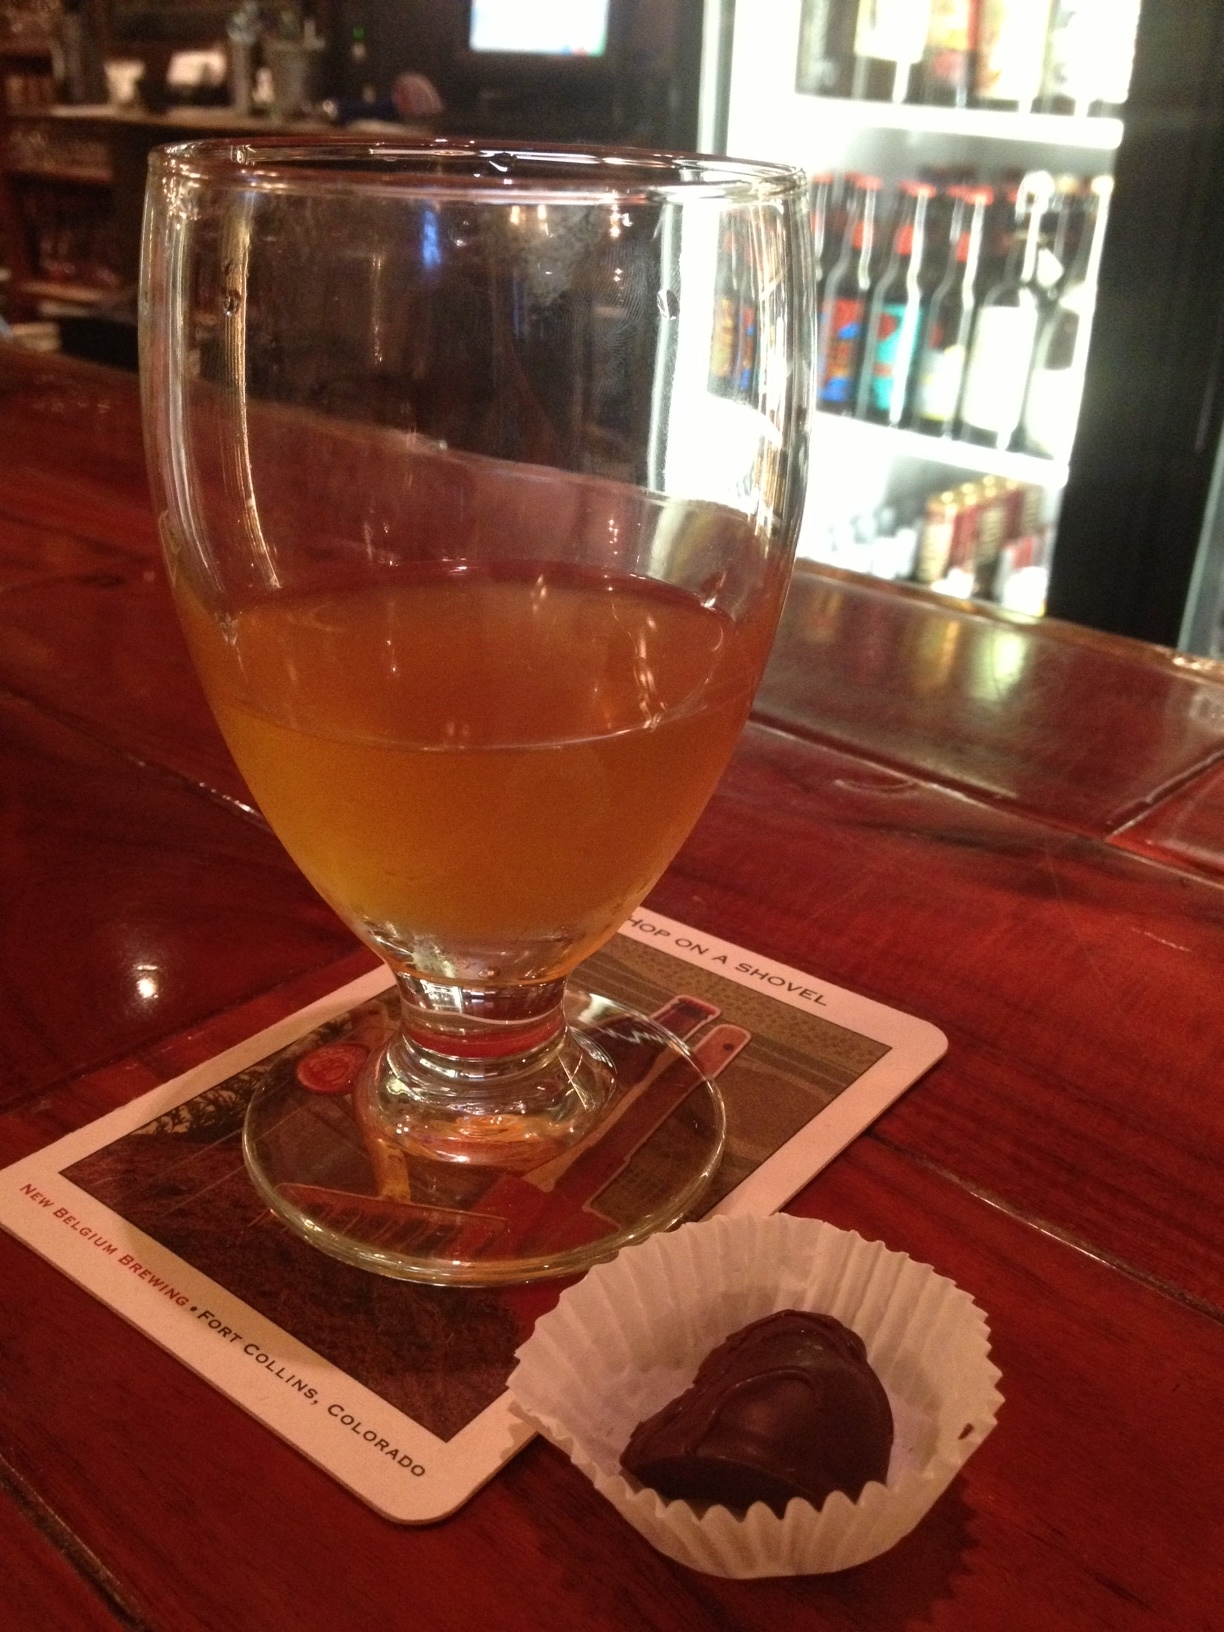 Finding the perfect beer and chocolate pairing at The Bier Garden.